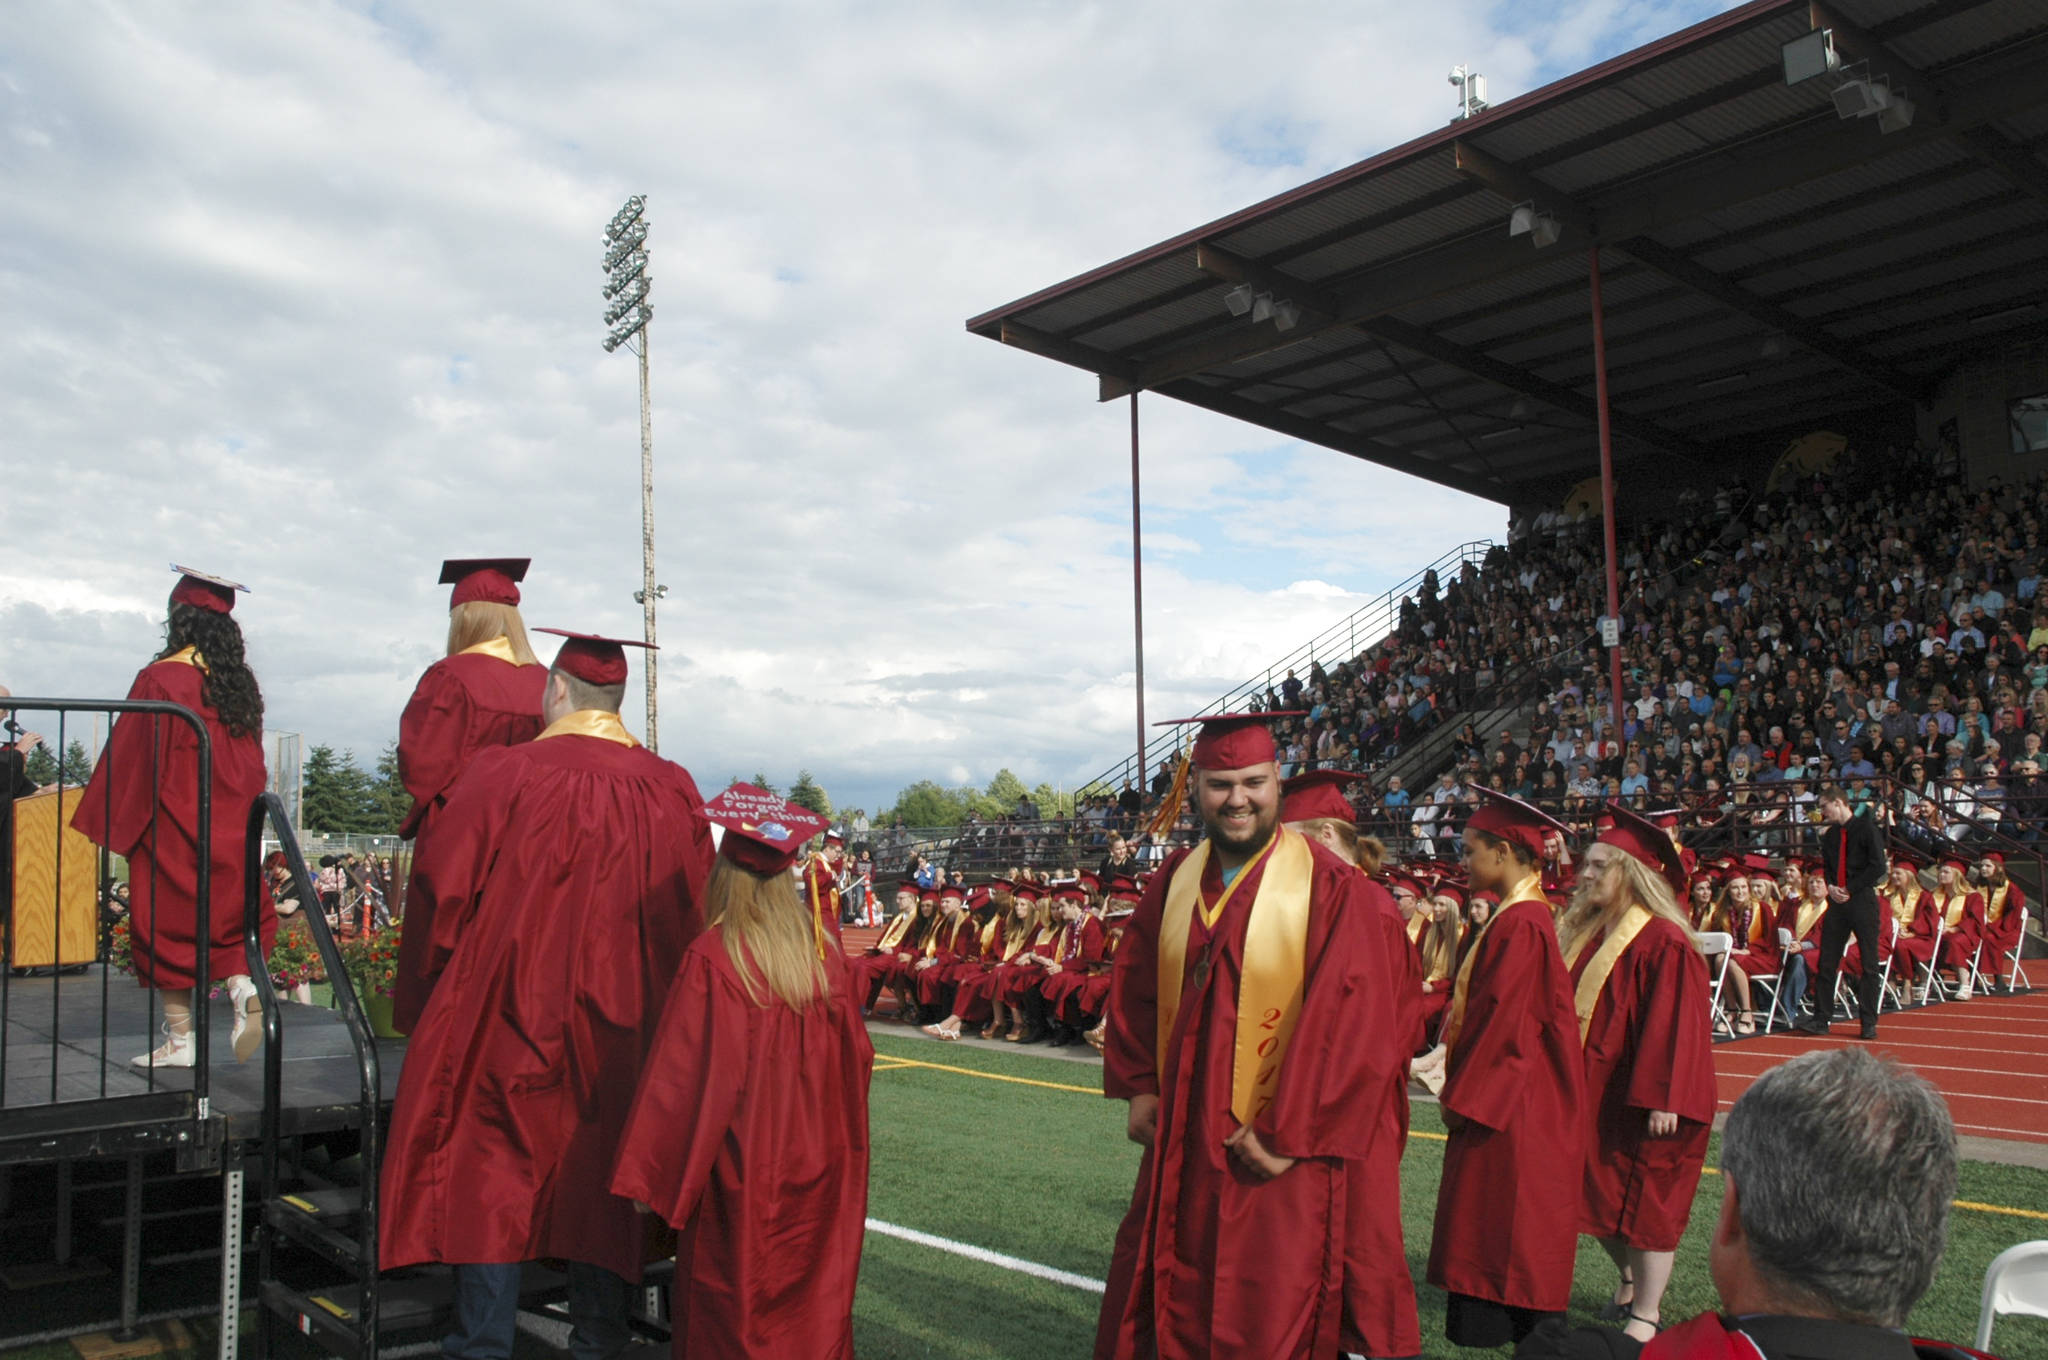 LHS graduates last class from current high school facility (slideshow)